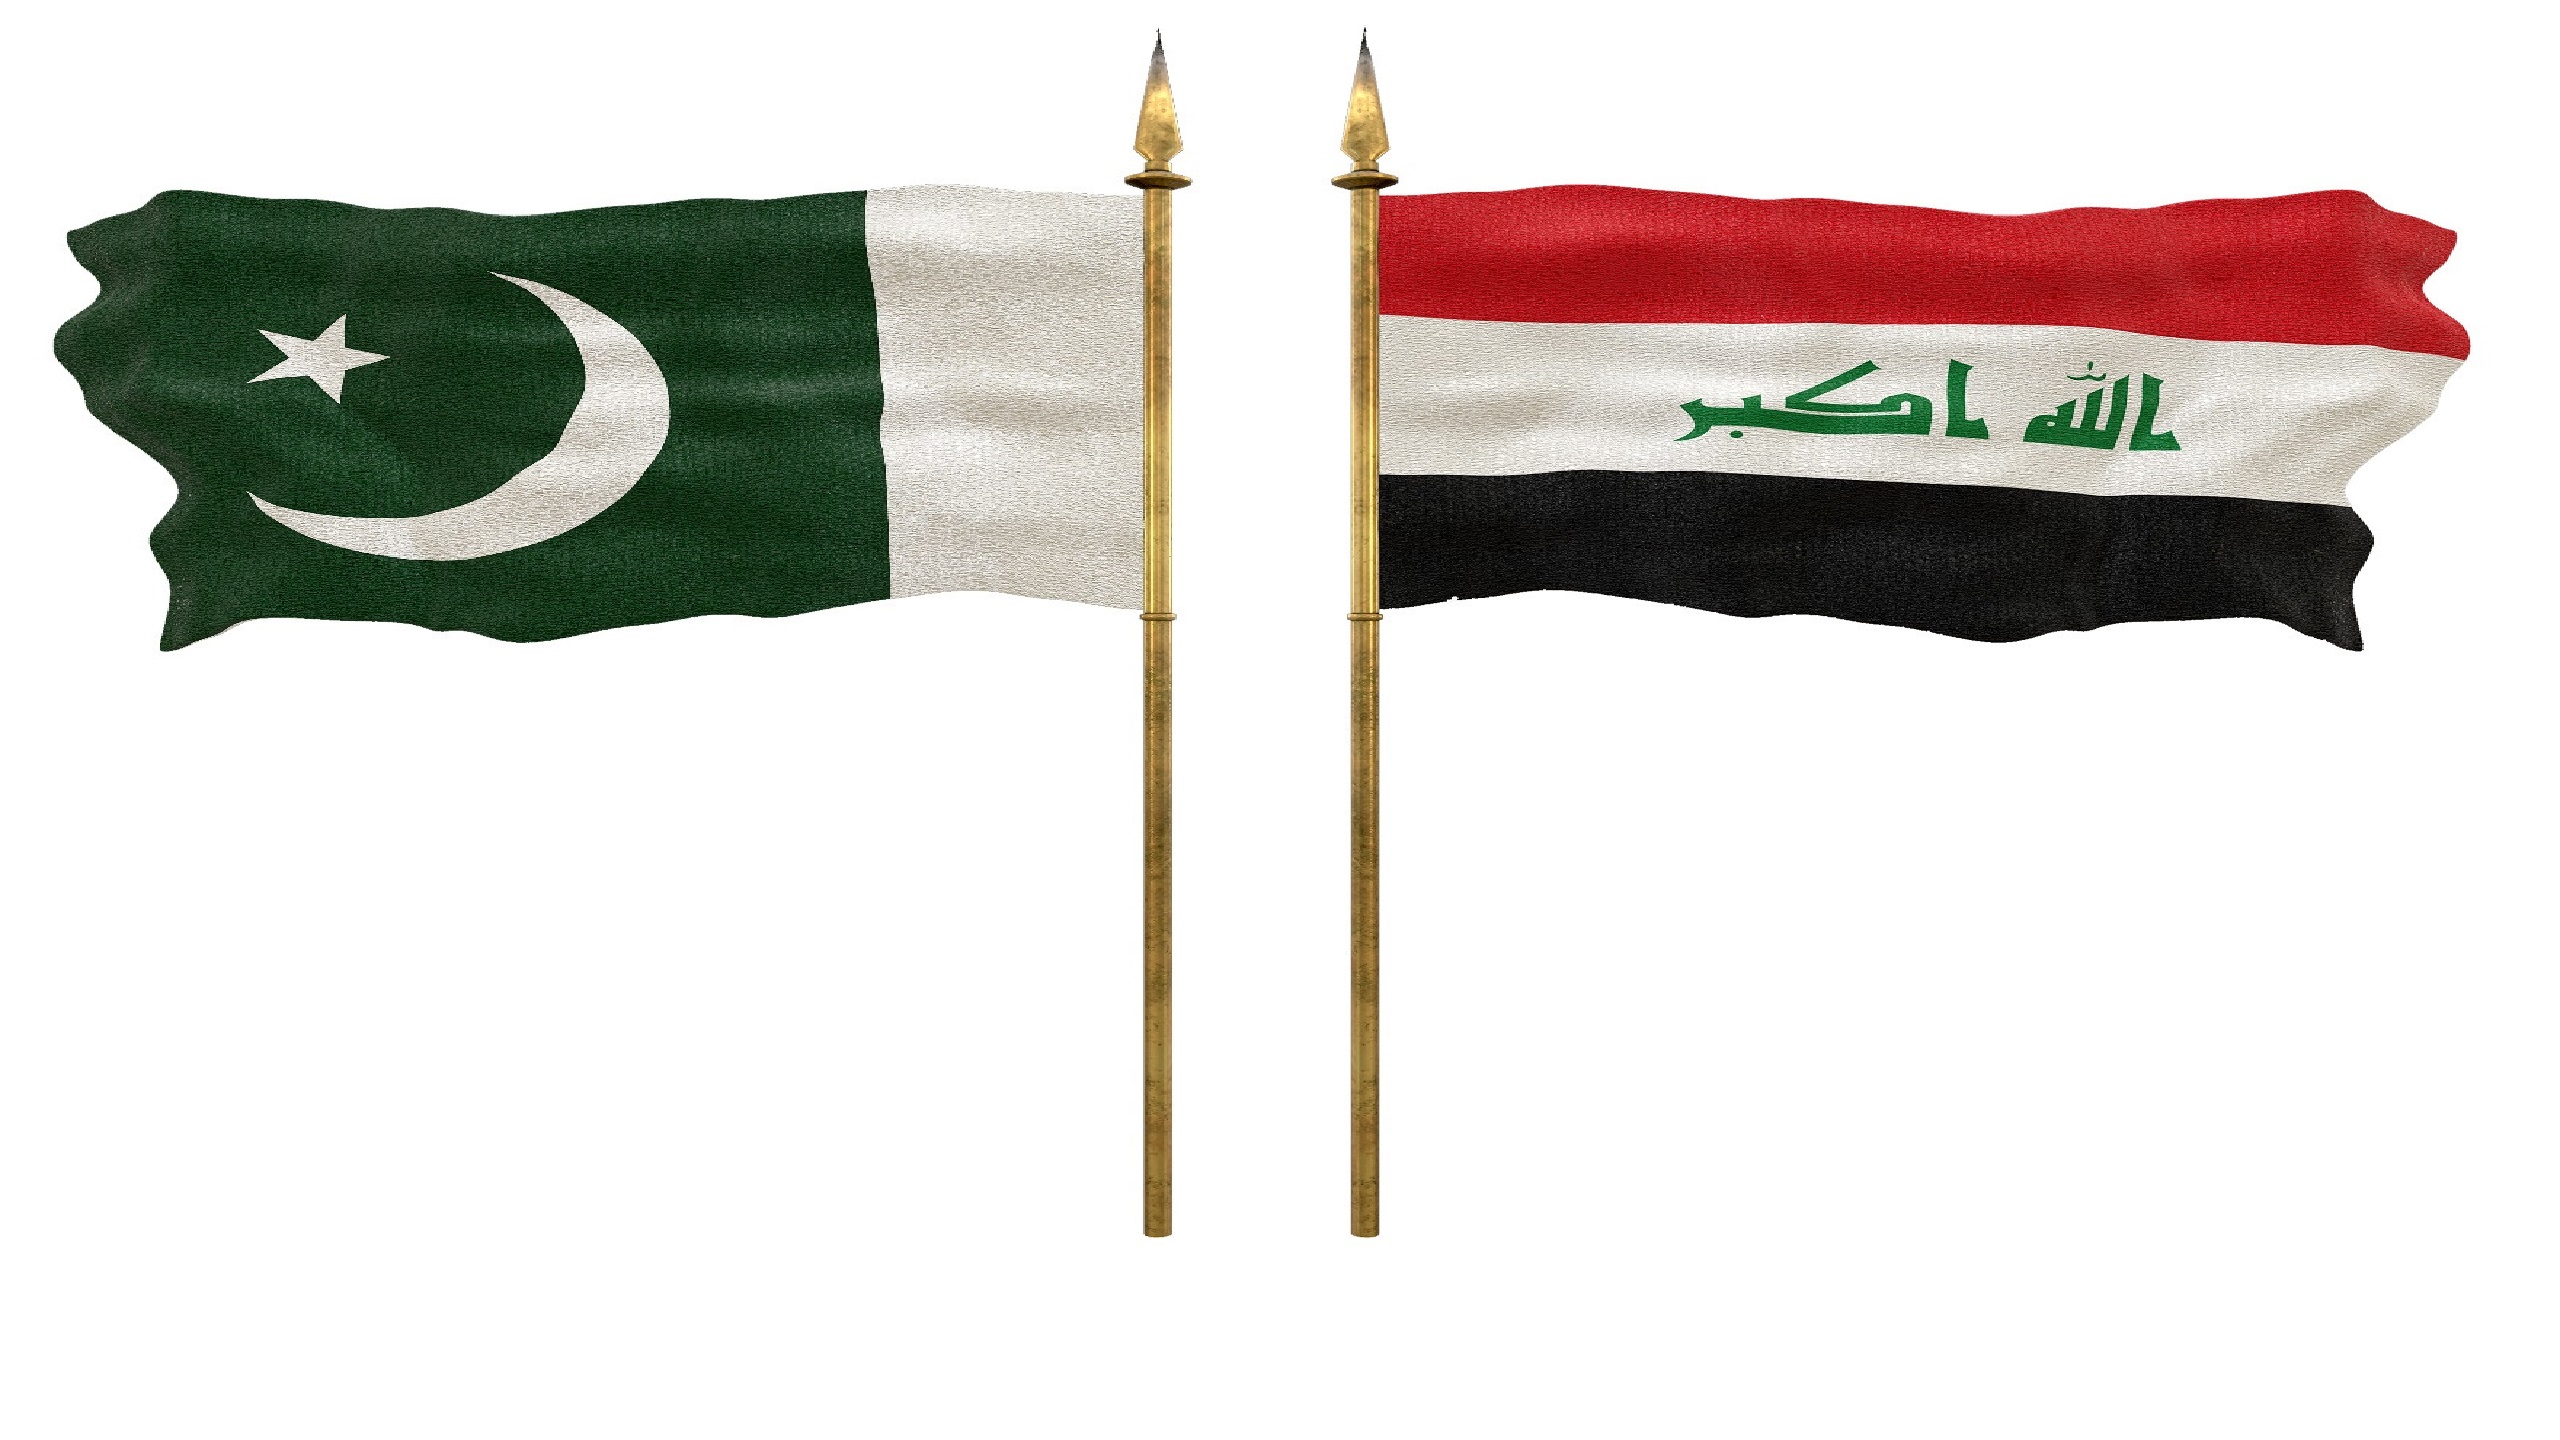 Pakistan, Iraq Strengthen Ties With Agreements on Cultural Cooperation, Visa Exemptions